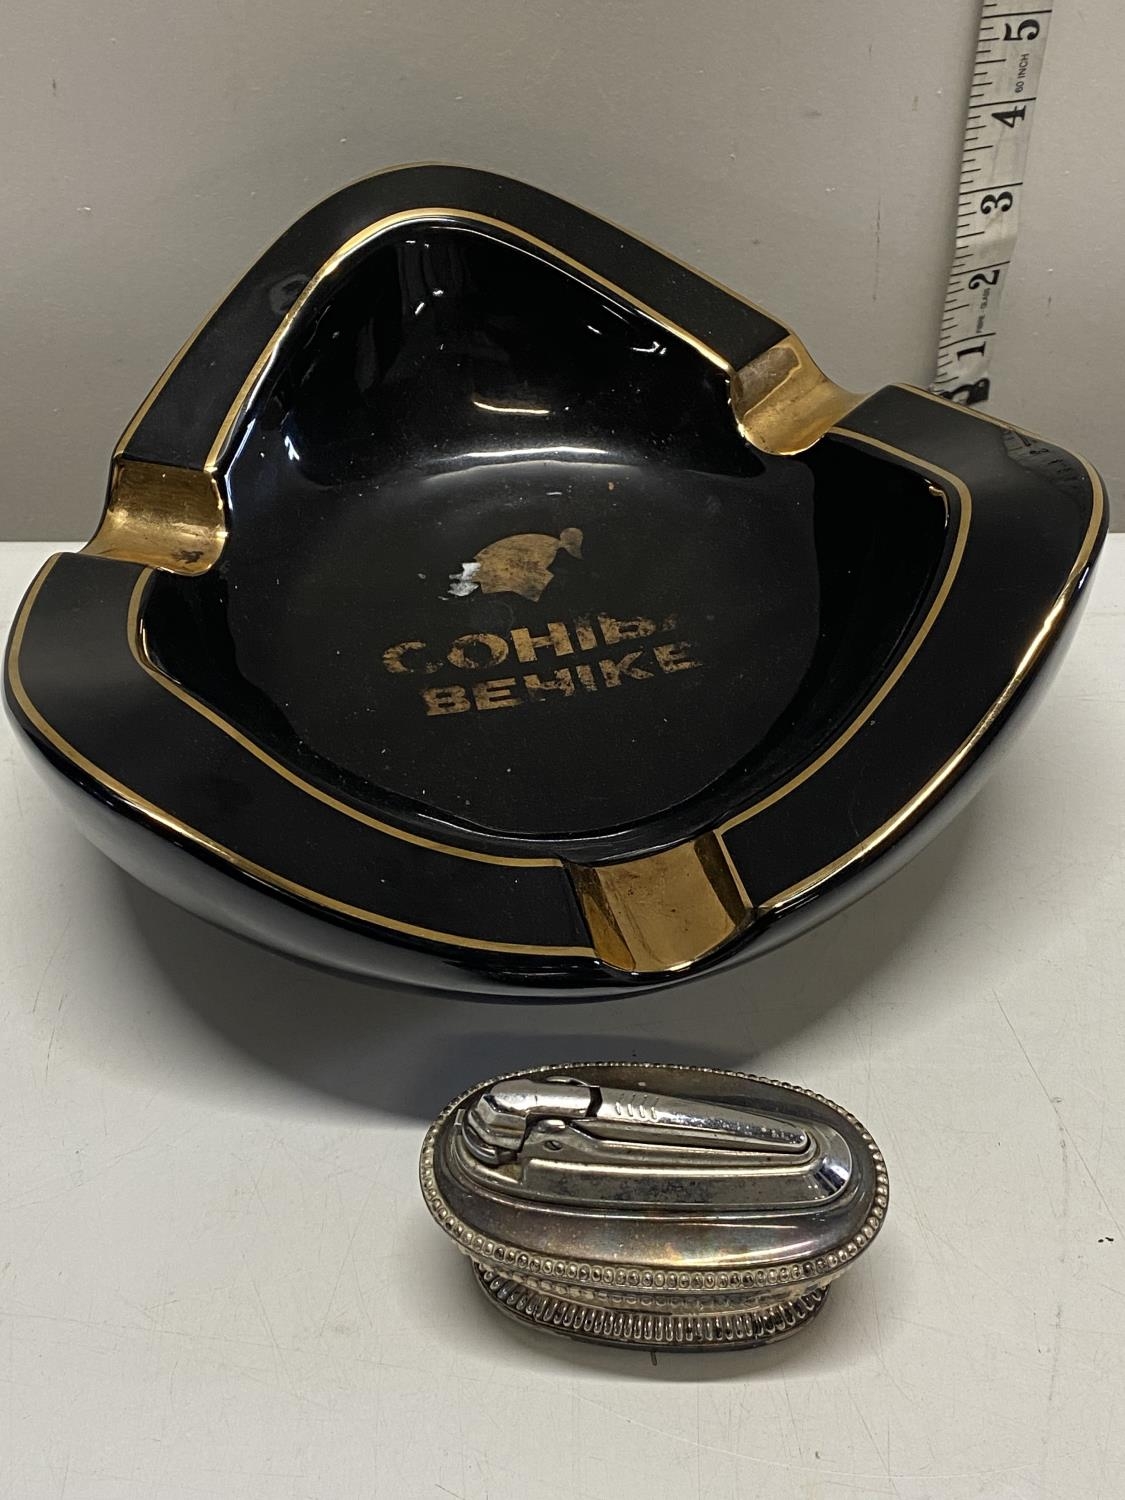 A large vintage Cohiba cigar ceramic ash tray and a Ronson table lighter